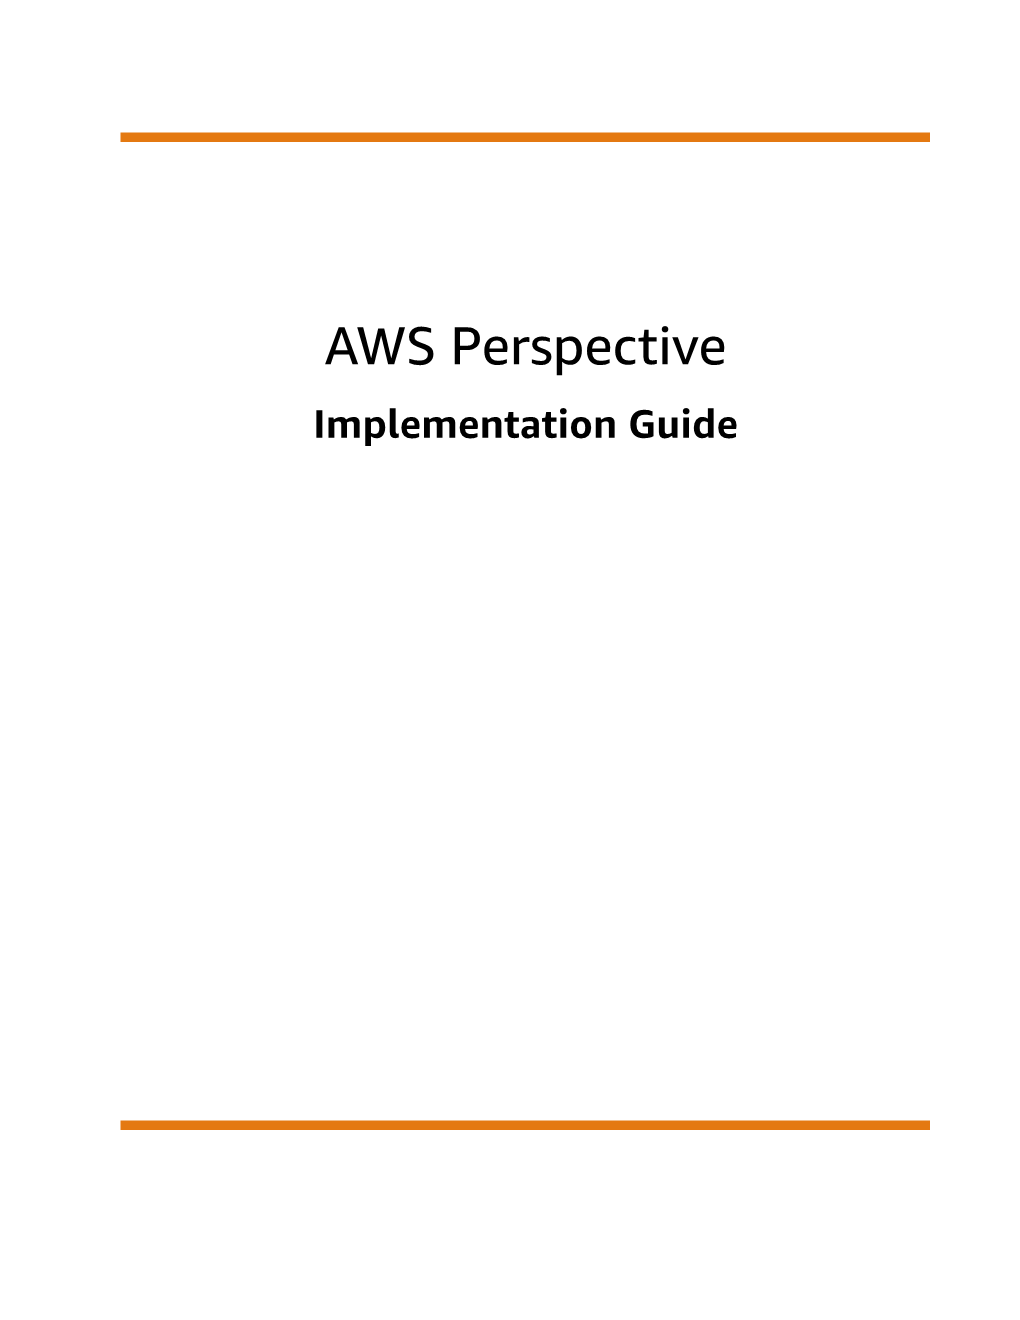 AWS Perspective Implementation Guide AWS Perspective Implementation Guide